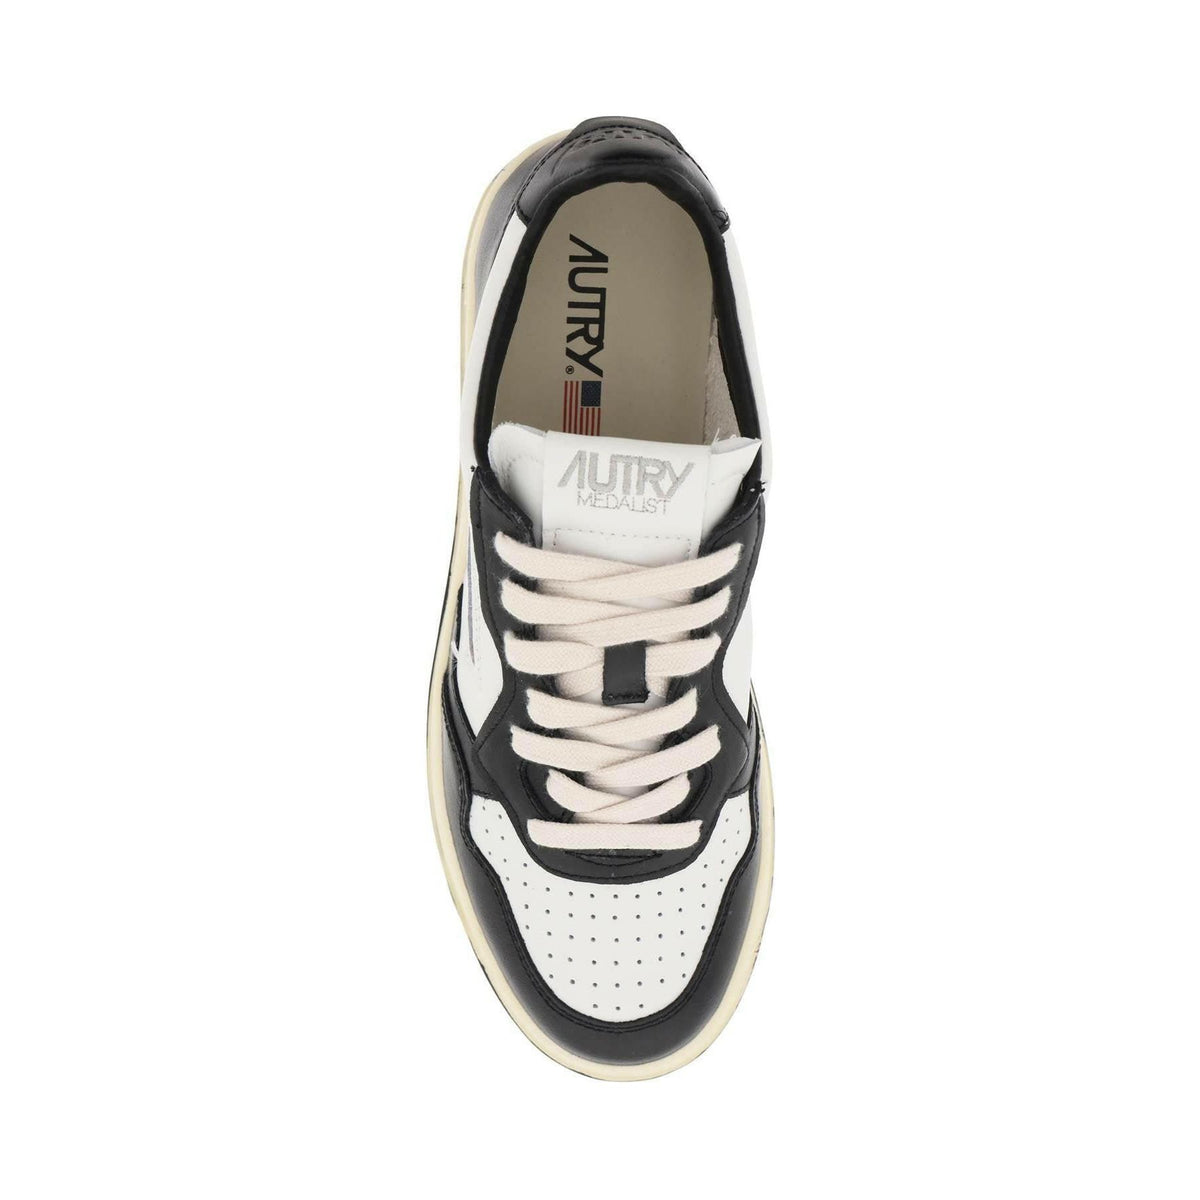 AUTRY - White and Black Medalist Low Leather Sneakers - JOHN JULIA